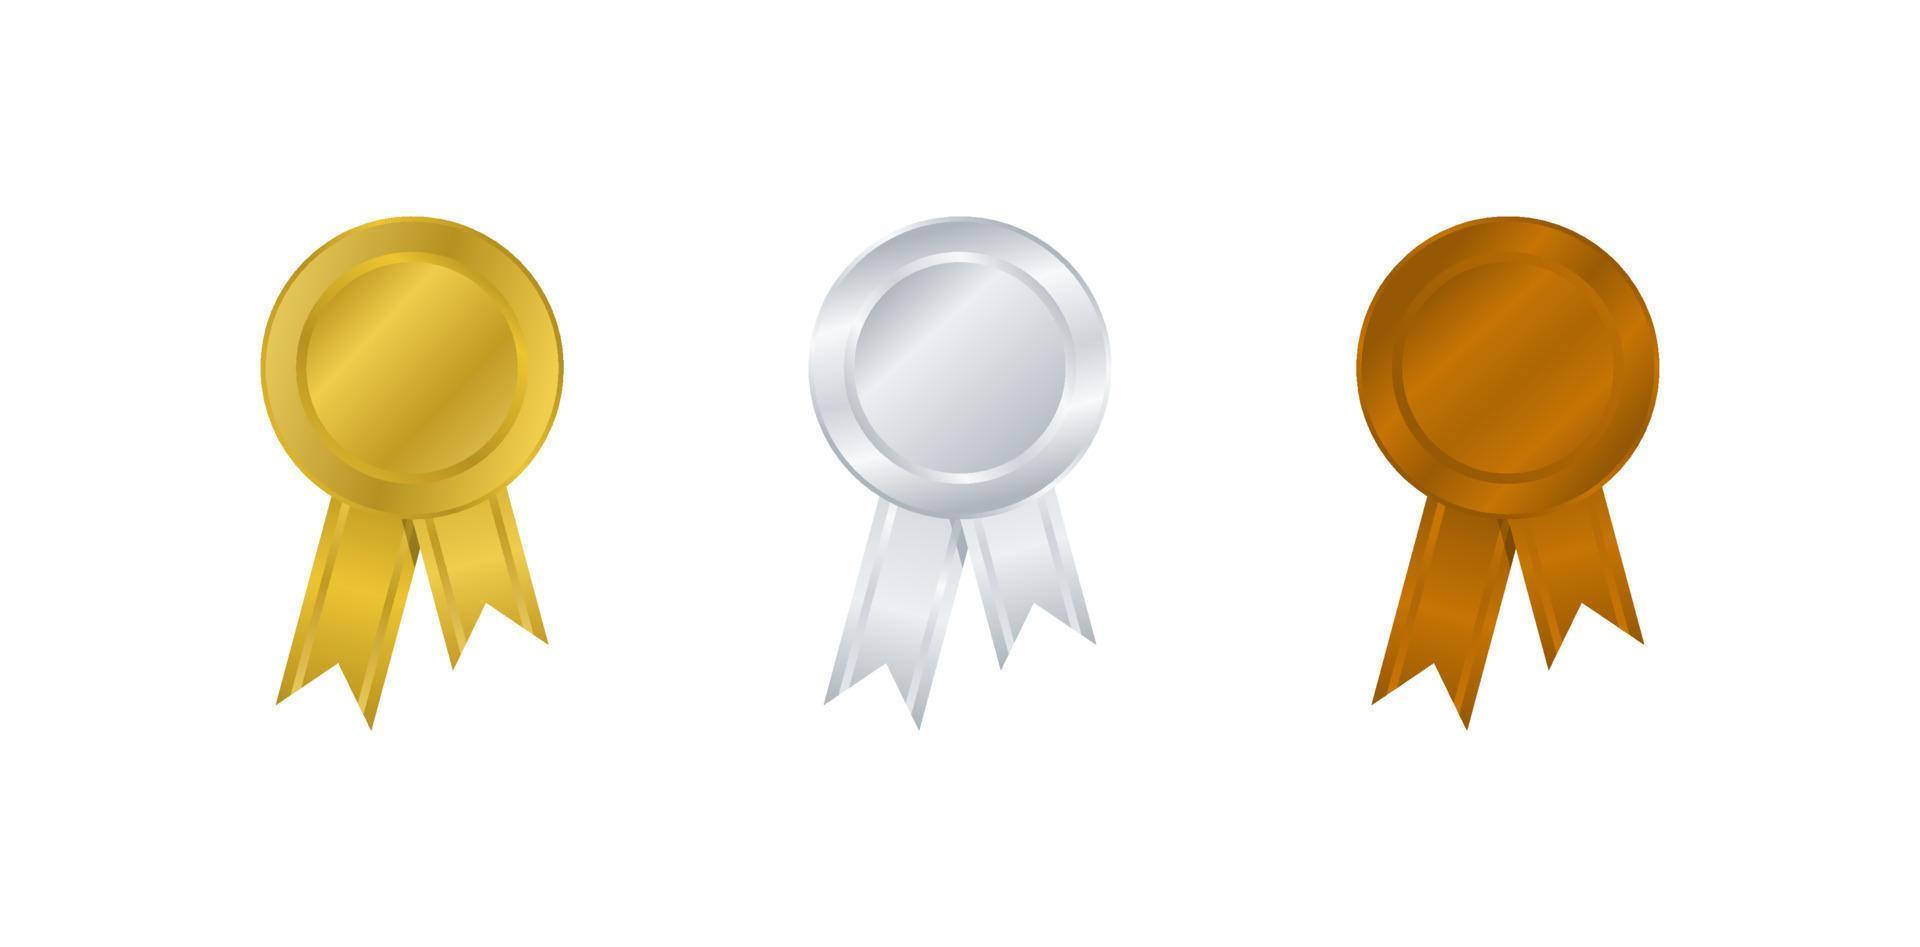 Gold, silver, and bronze medals with ribbons, medals for victory awards, championships vector